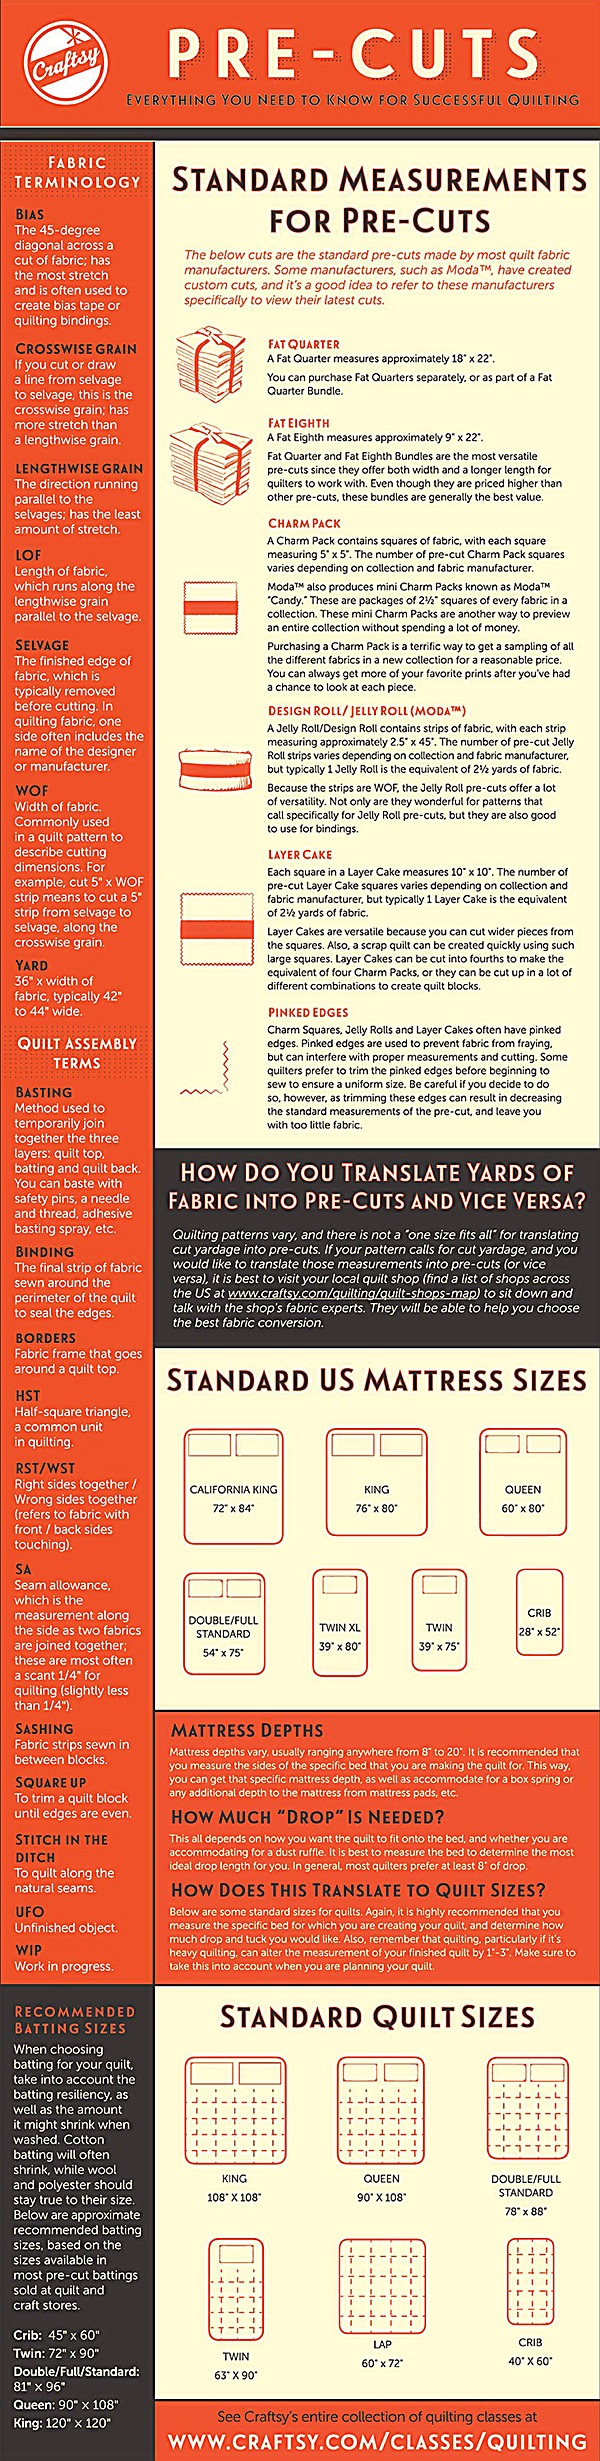 Sizes Every Quilter Needs to Know (Infographic)